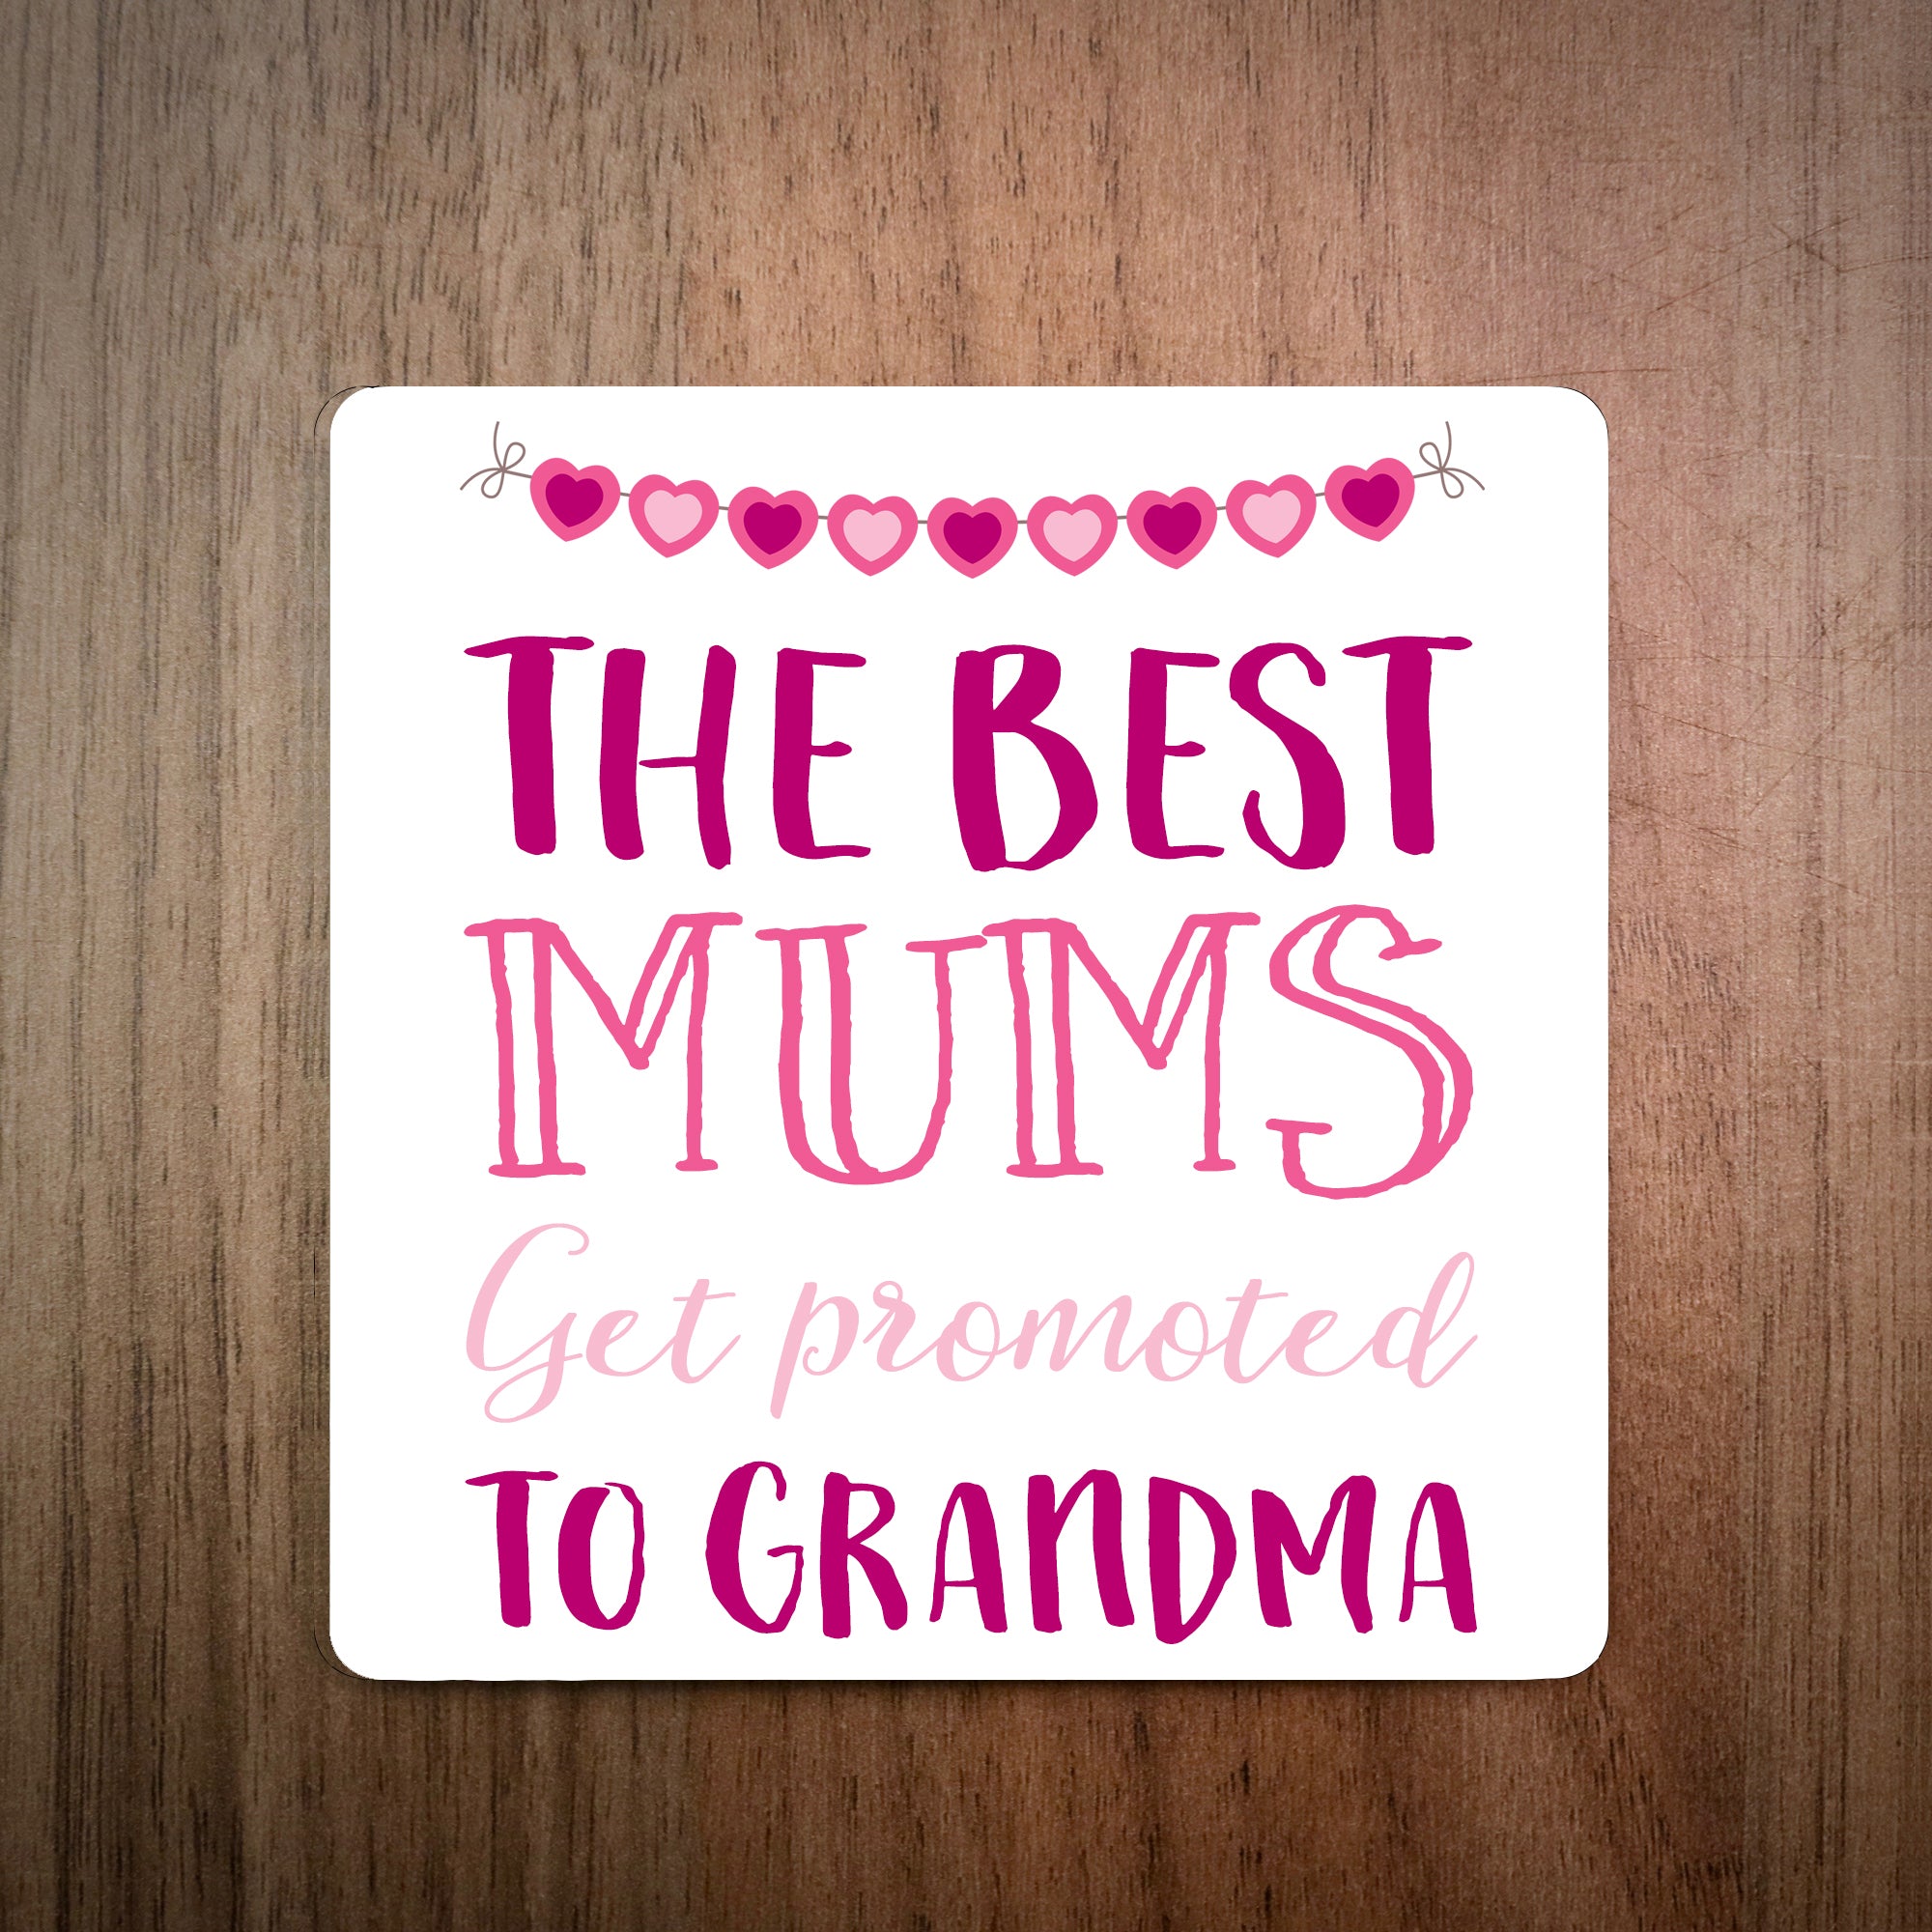 The Best Mums Get Promoted To Grandma Coaster